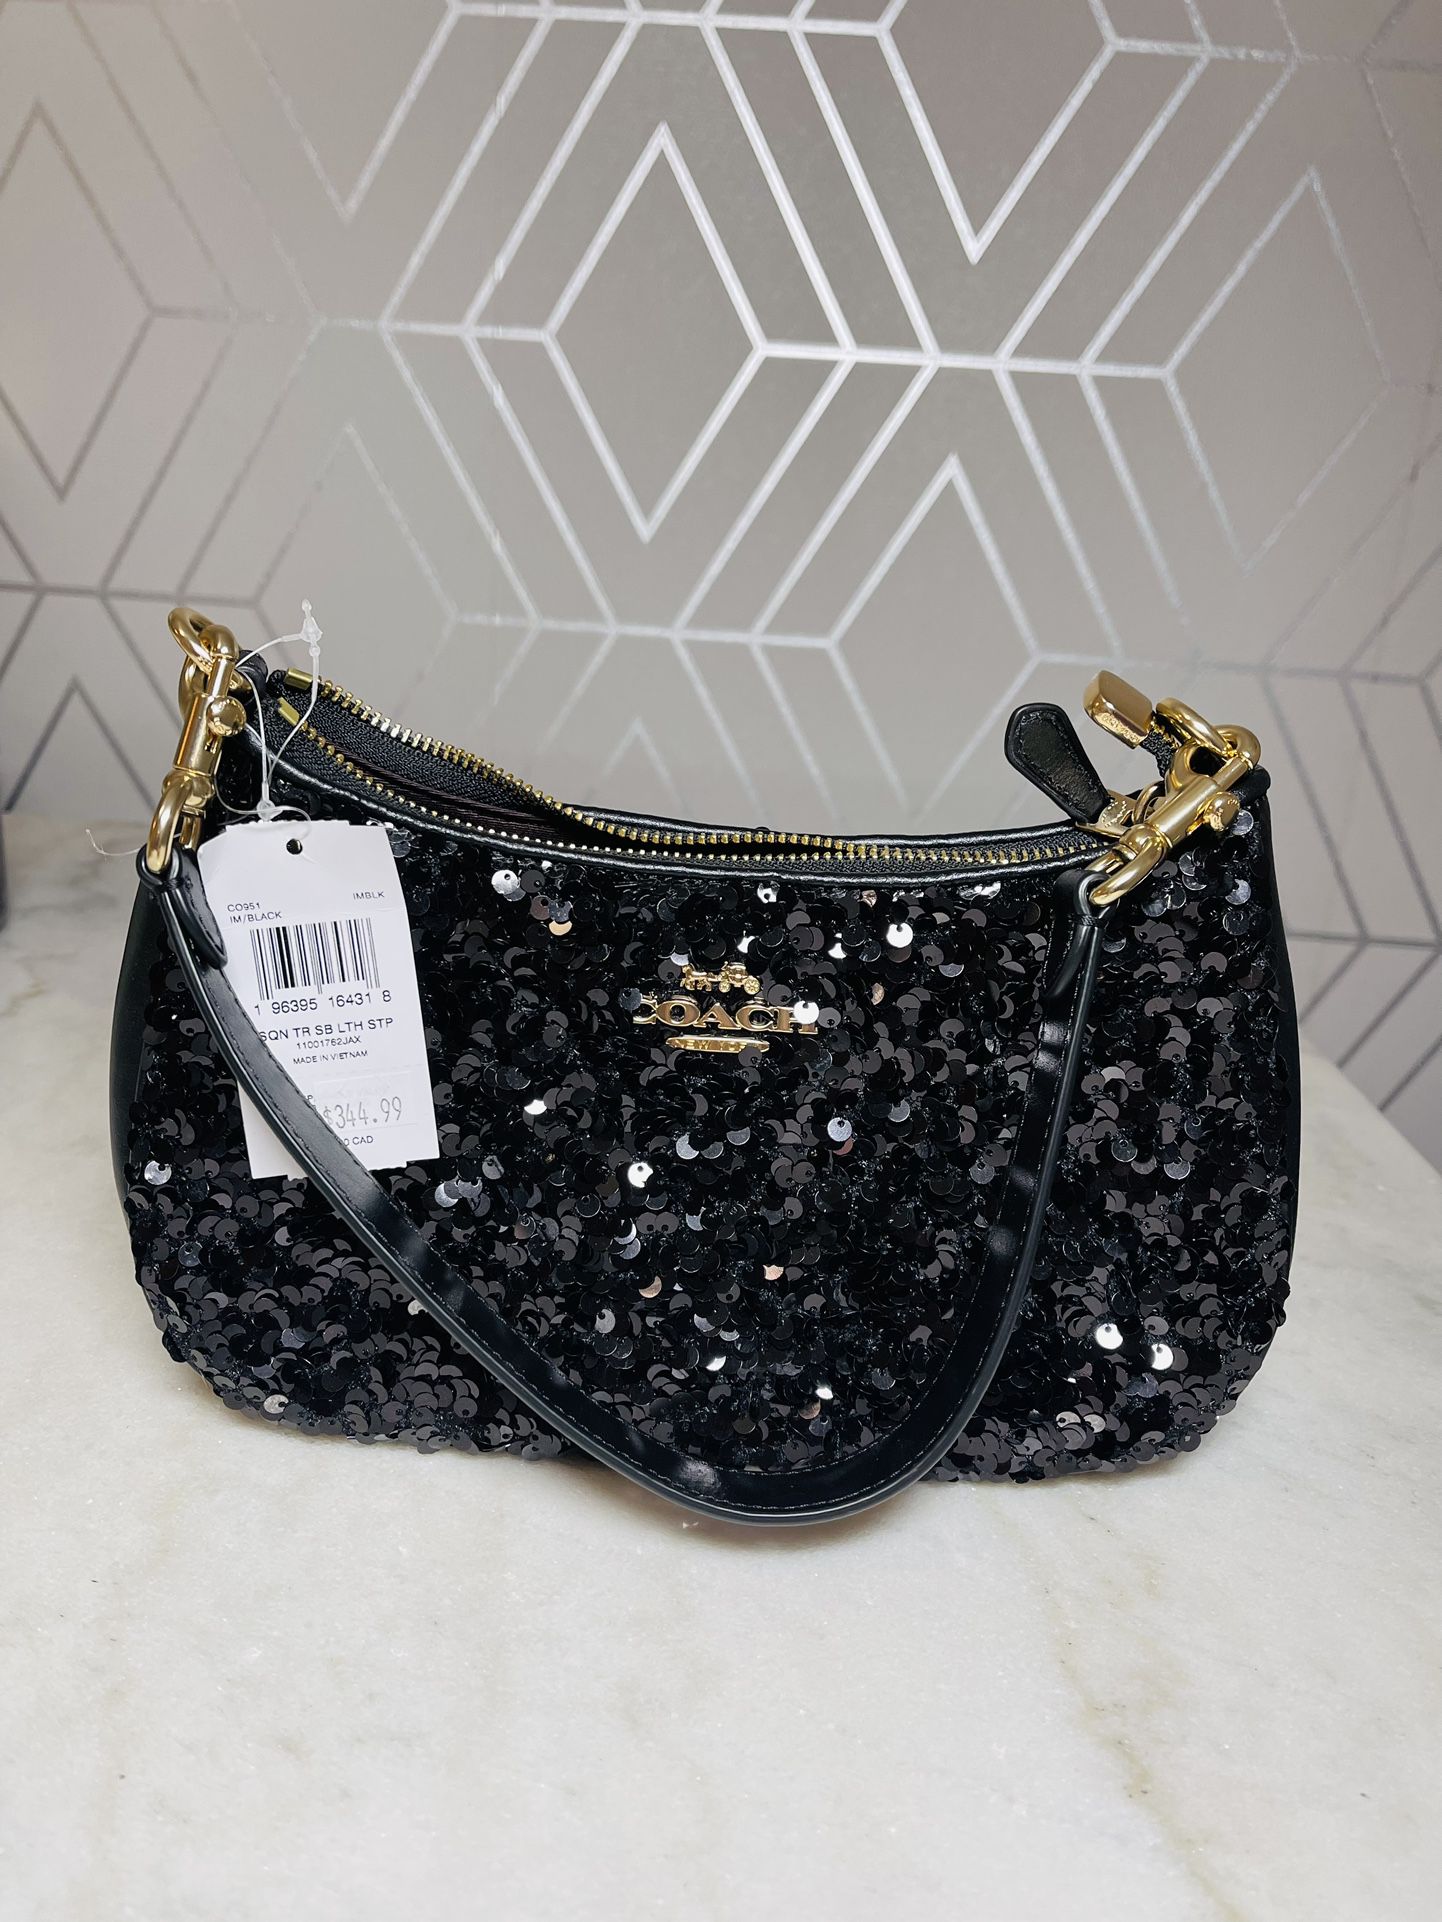 NWT COACH CO951 Teri Shoulder Bag In Sequins And Smooth Leather Gold/Black